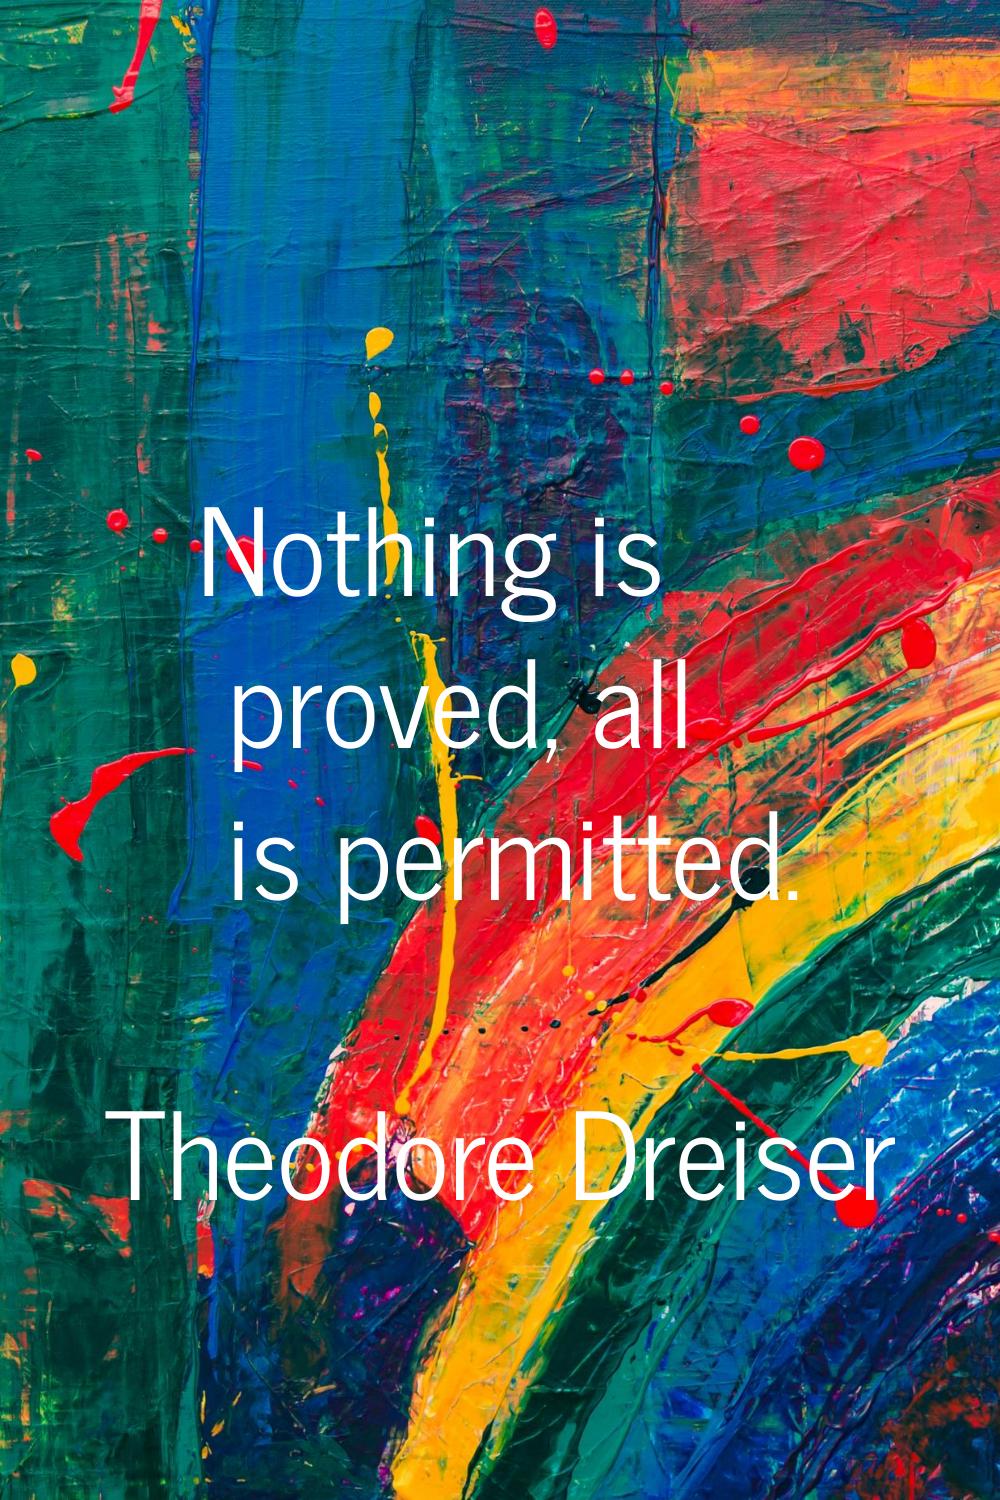 Nothing is proved, all is permitted.